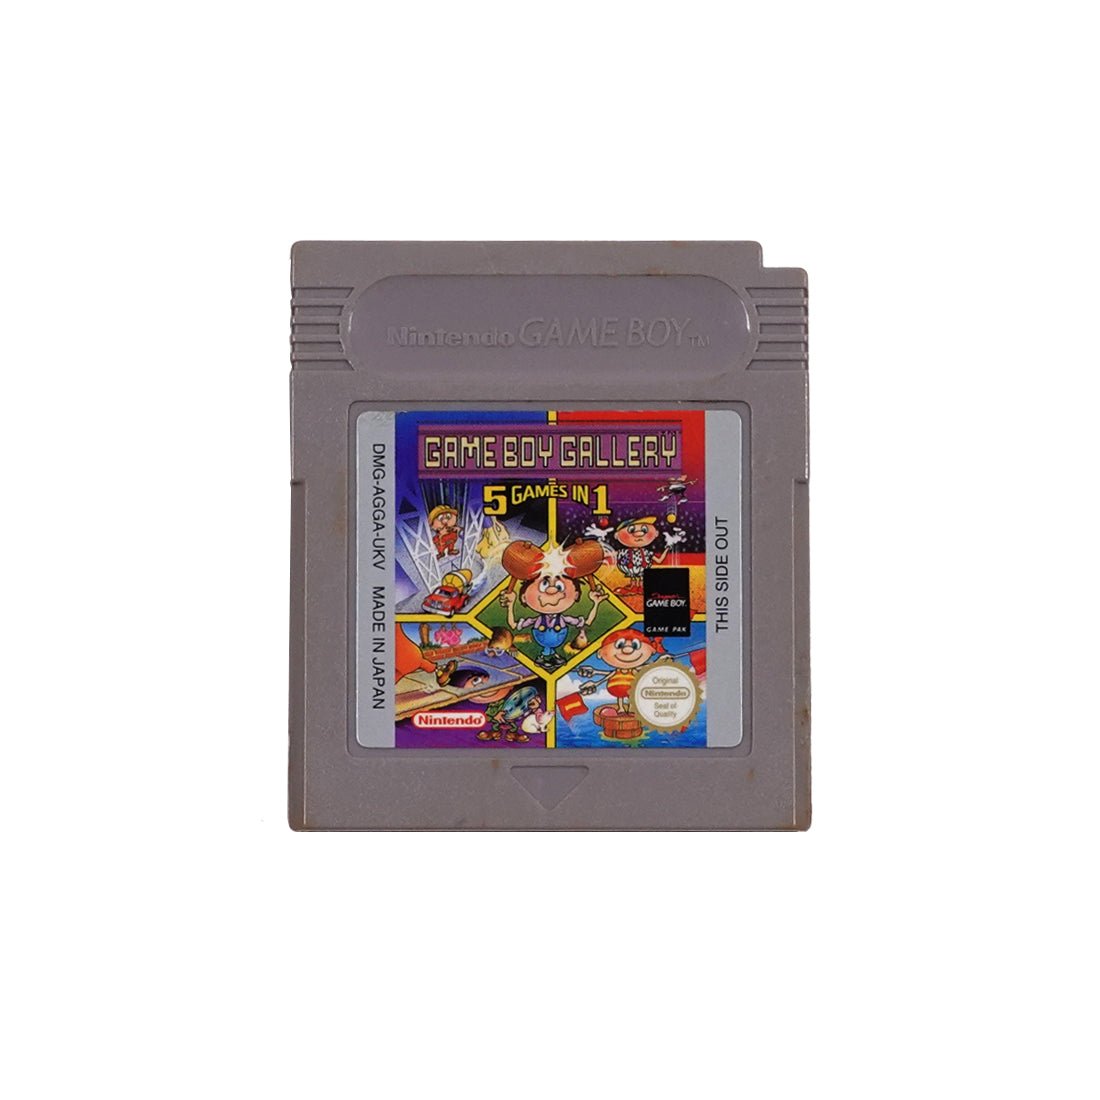 (Pre-Owned) Gameboy Gallery: 5 Games in 1 - Gameboy Classic - Store 974 | ستور ٩٧٤